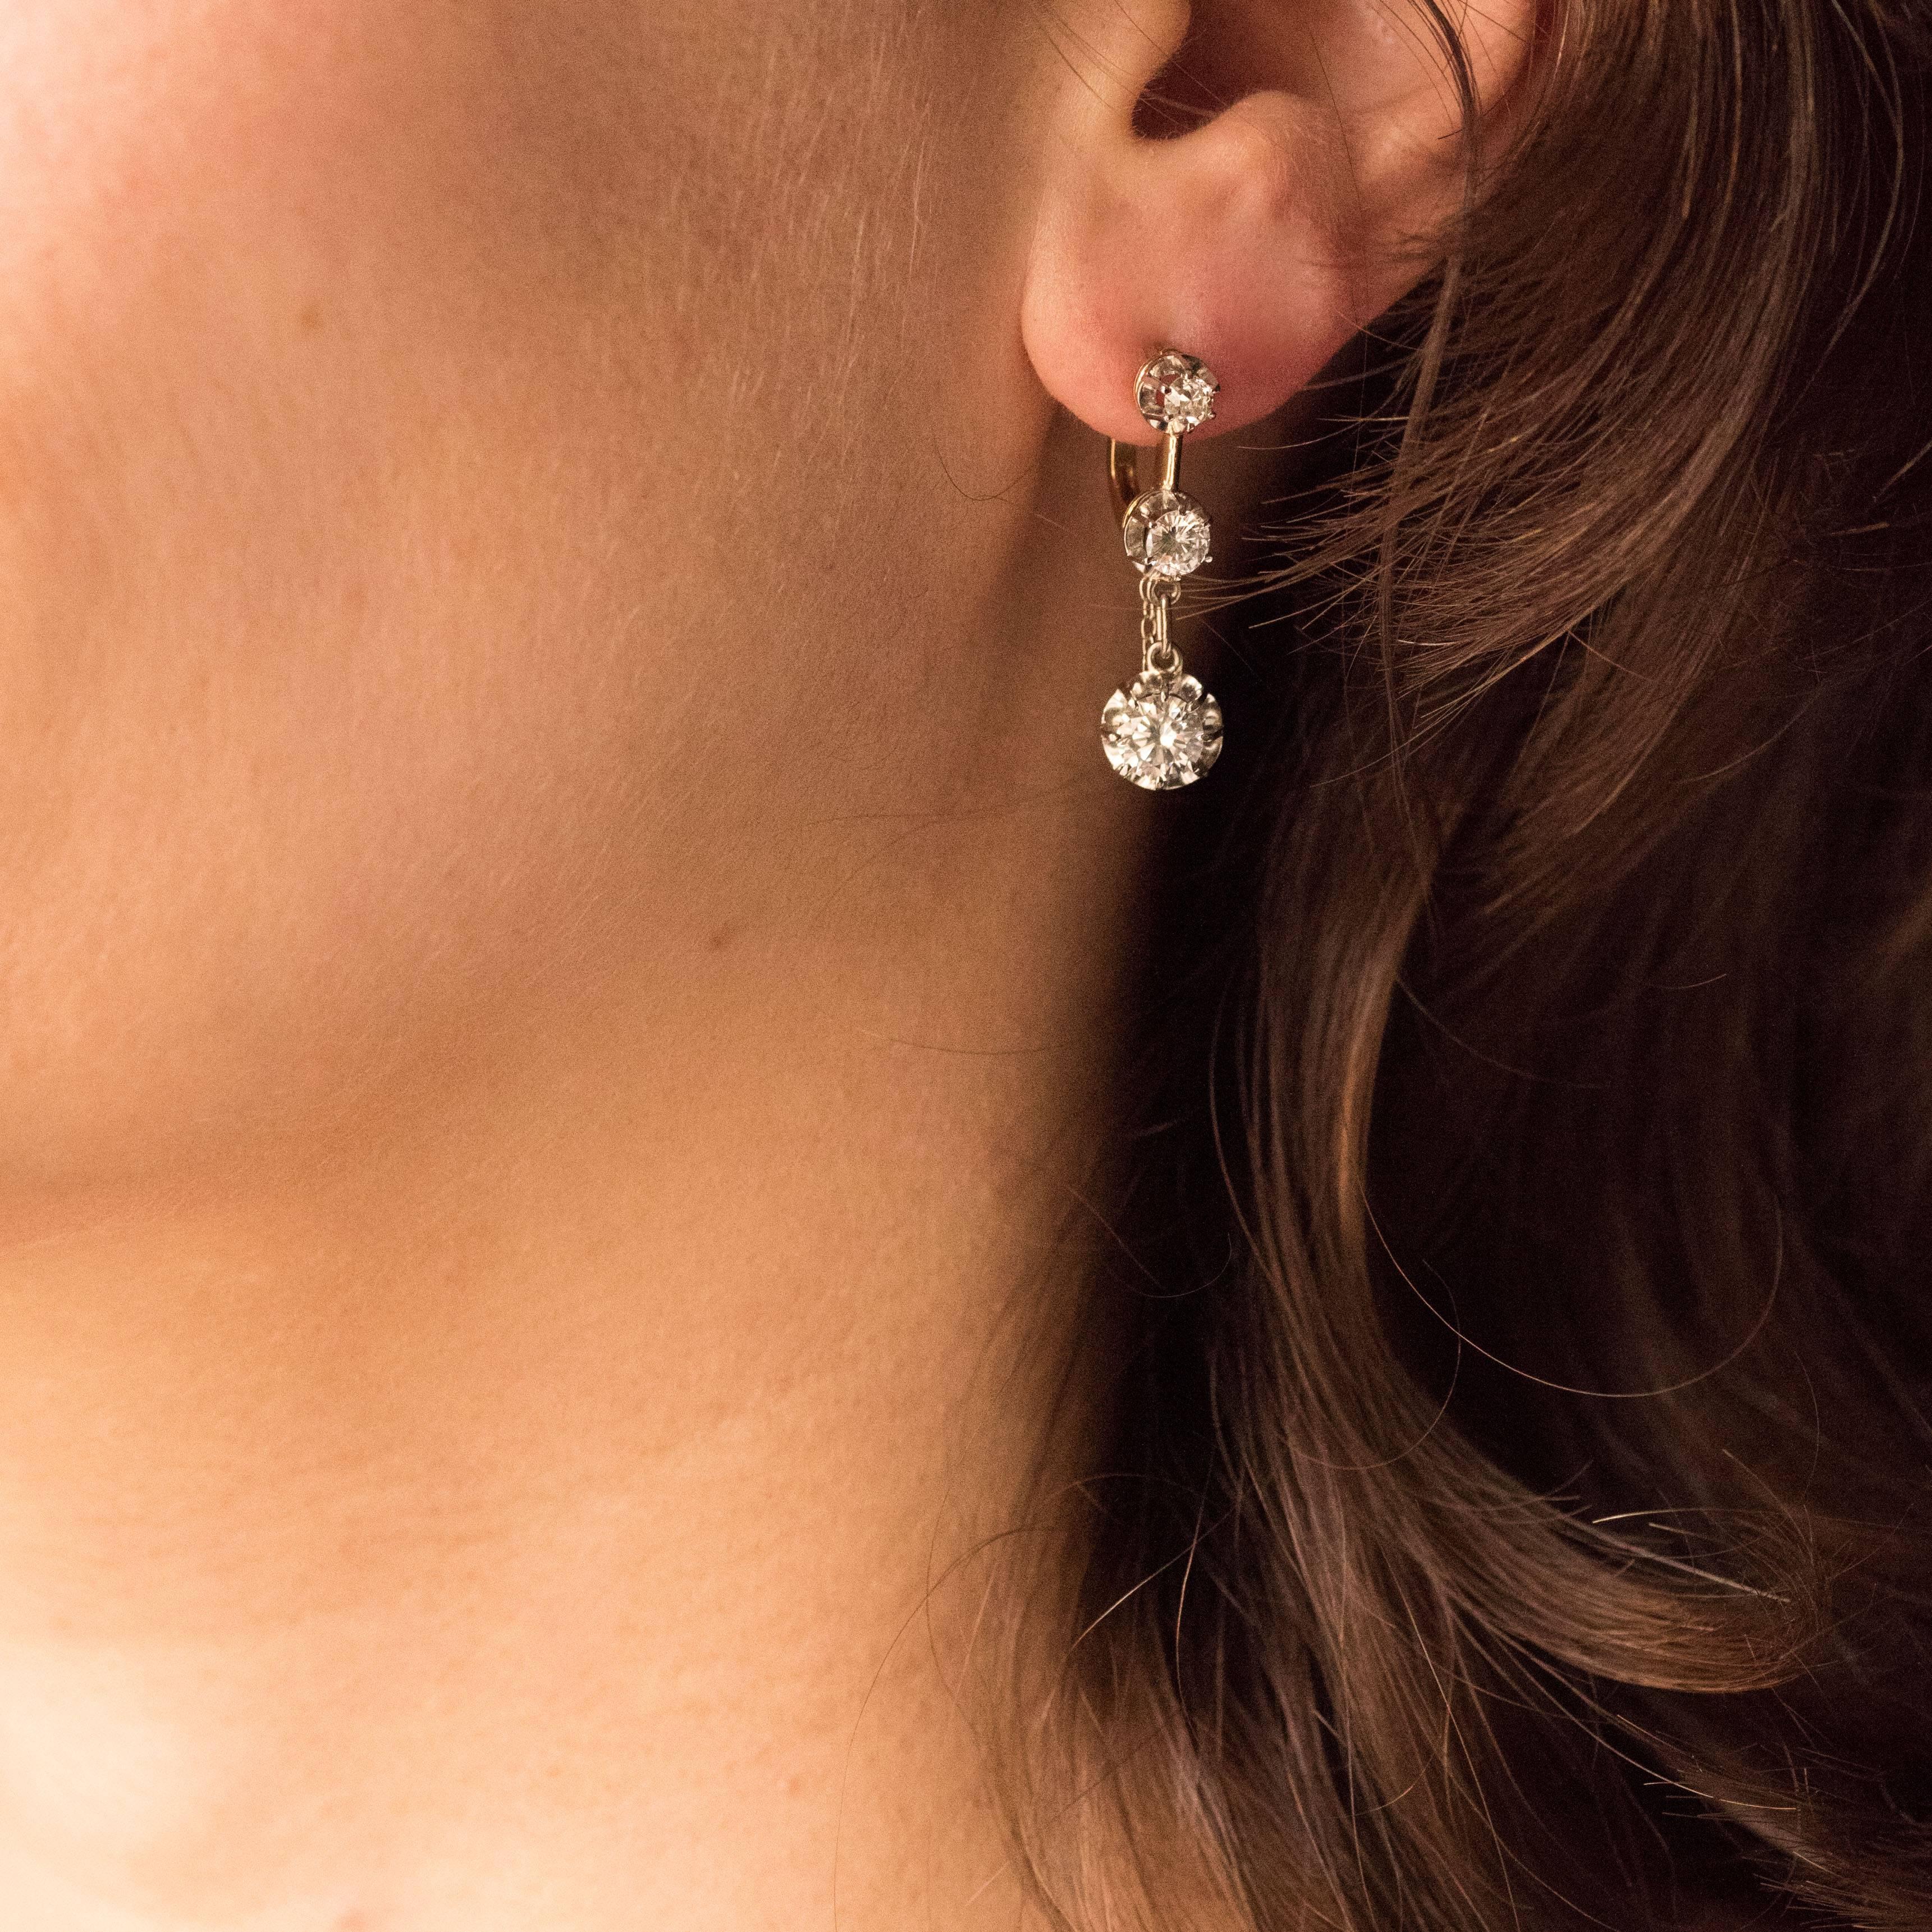 Earrings in 18 karats yellow and white gold, eagle's head hallmark.
Sublime and elegant, each earring is composed of 3 brilliant-cut diamonds set with claws, falling. The clasp puts on from the front.
Total weight of diamonds: about 1.95 carat.